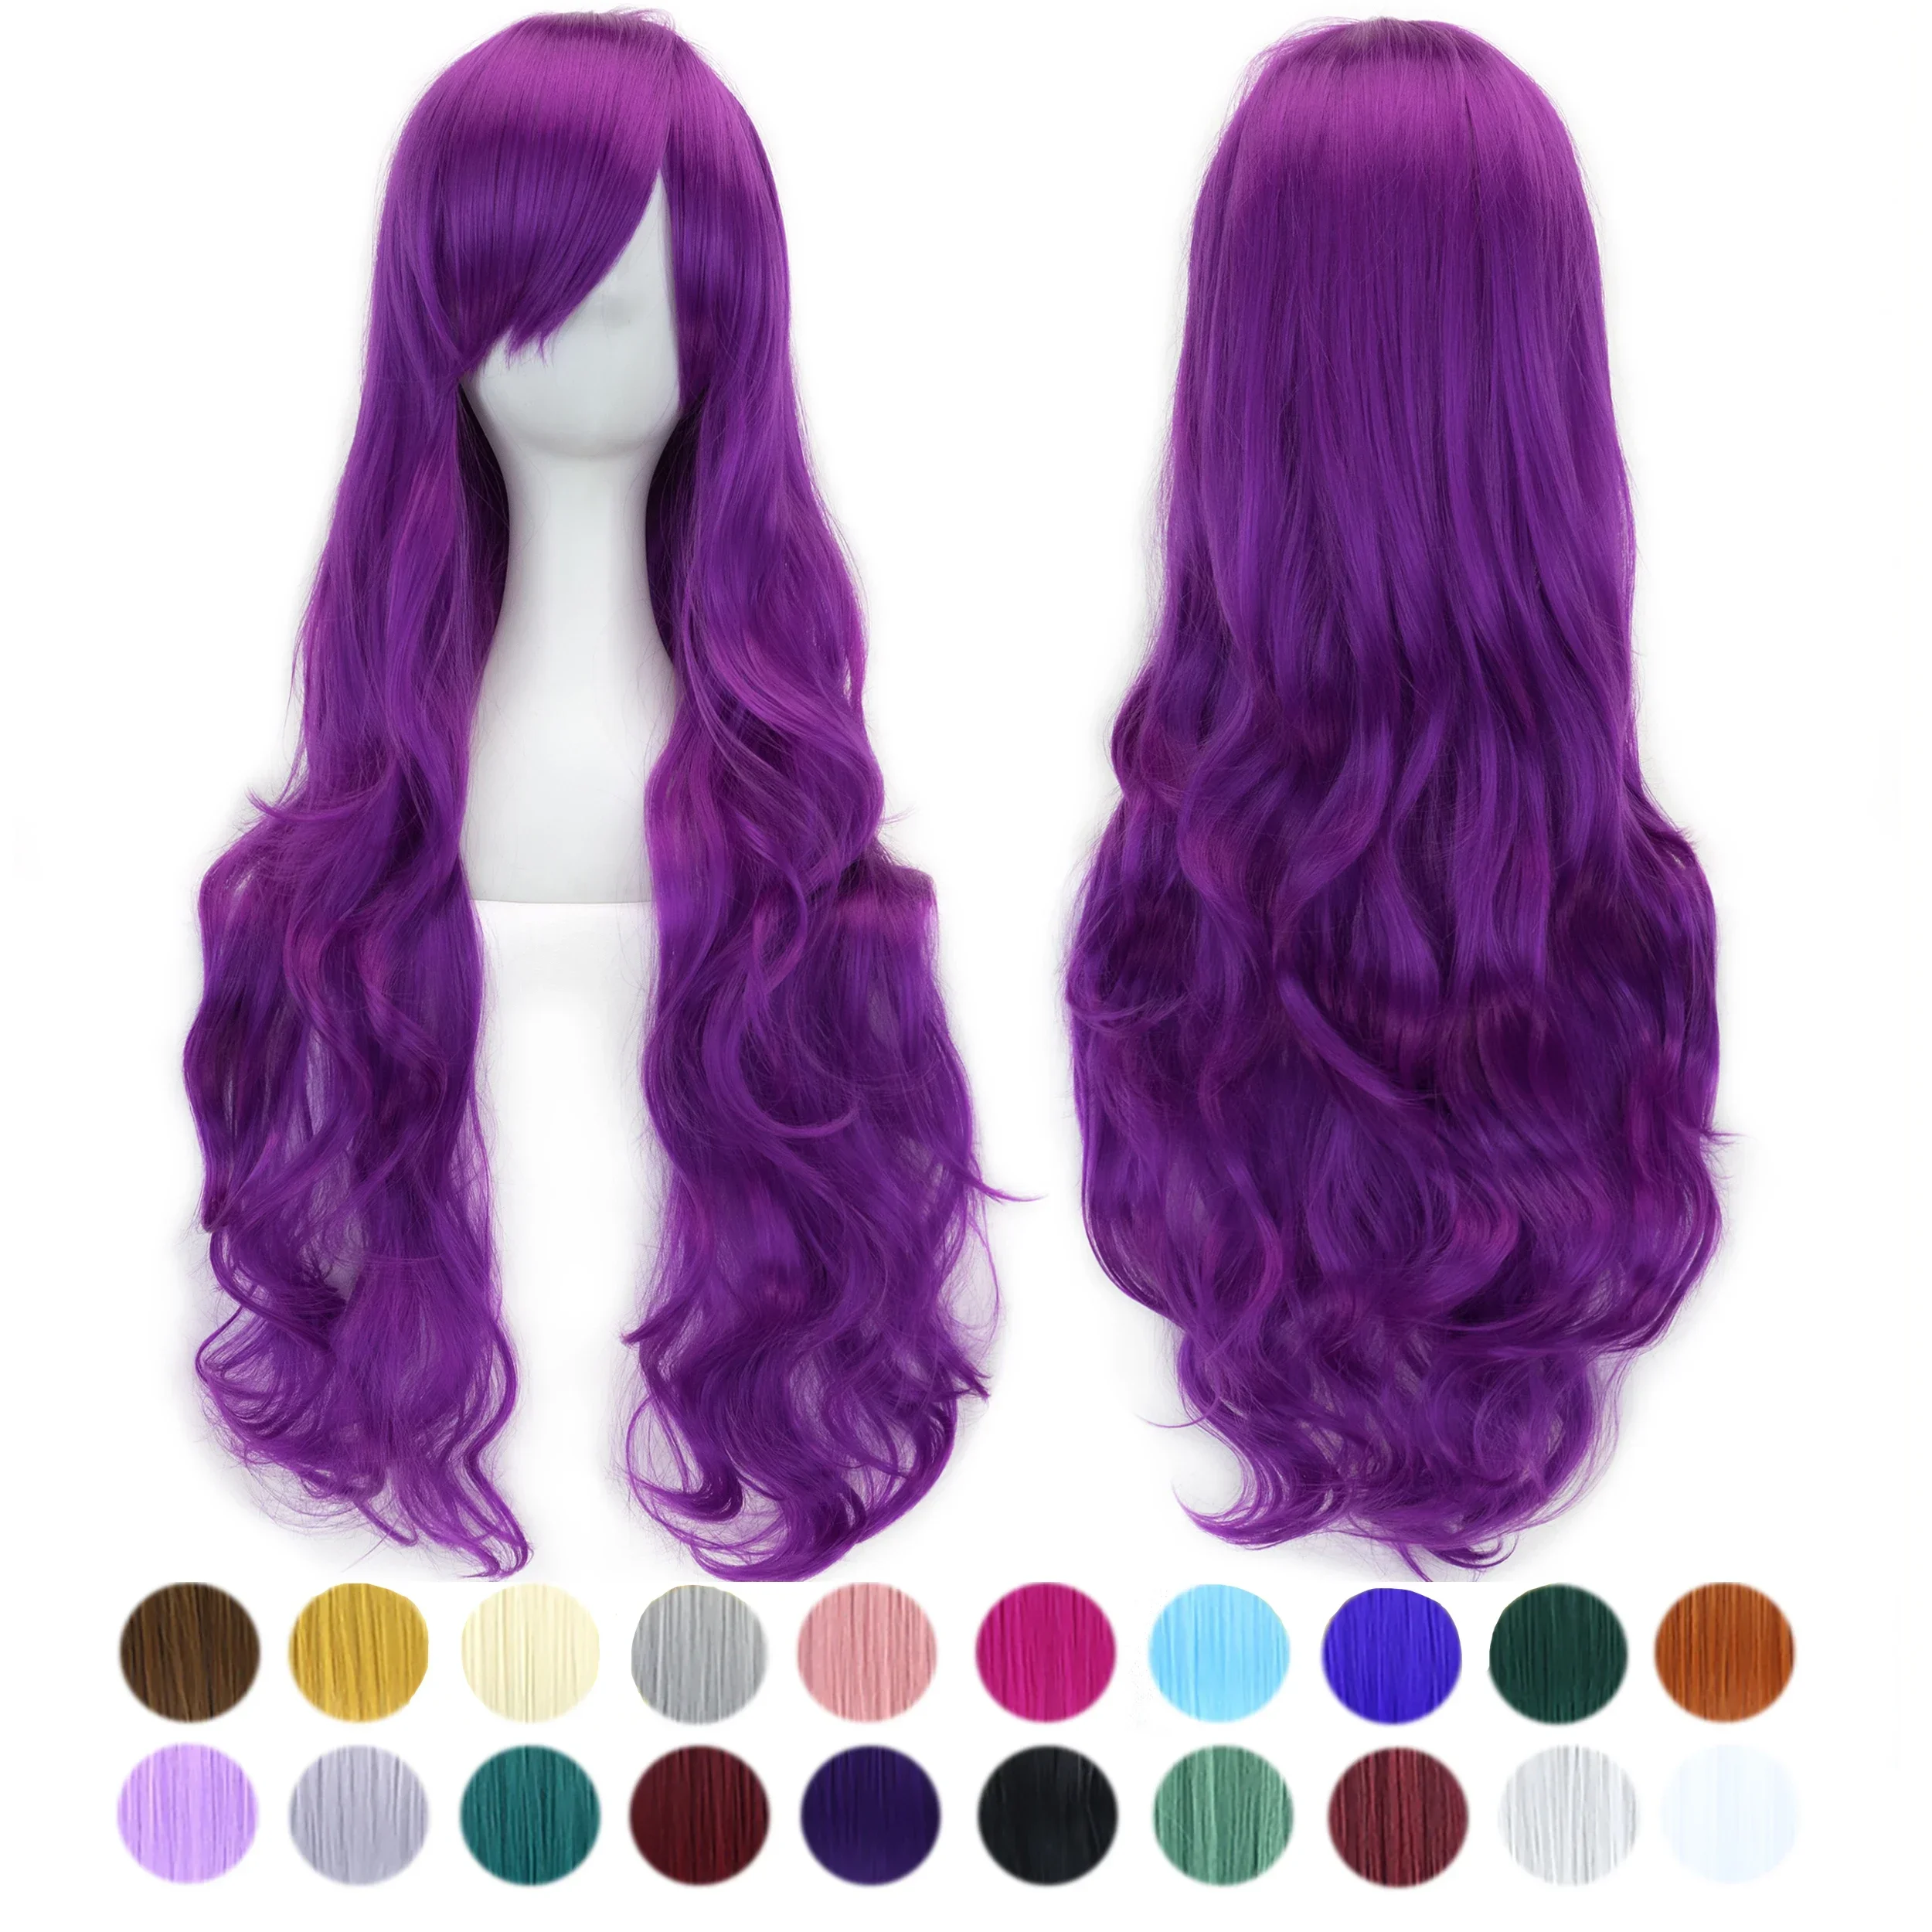 

80cm Long Violet Curly Natural Hair Cosplay Wig with Bangs Colorful Halloween Costume Party Wigs for Women